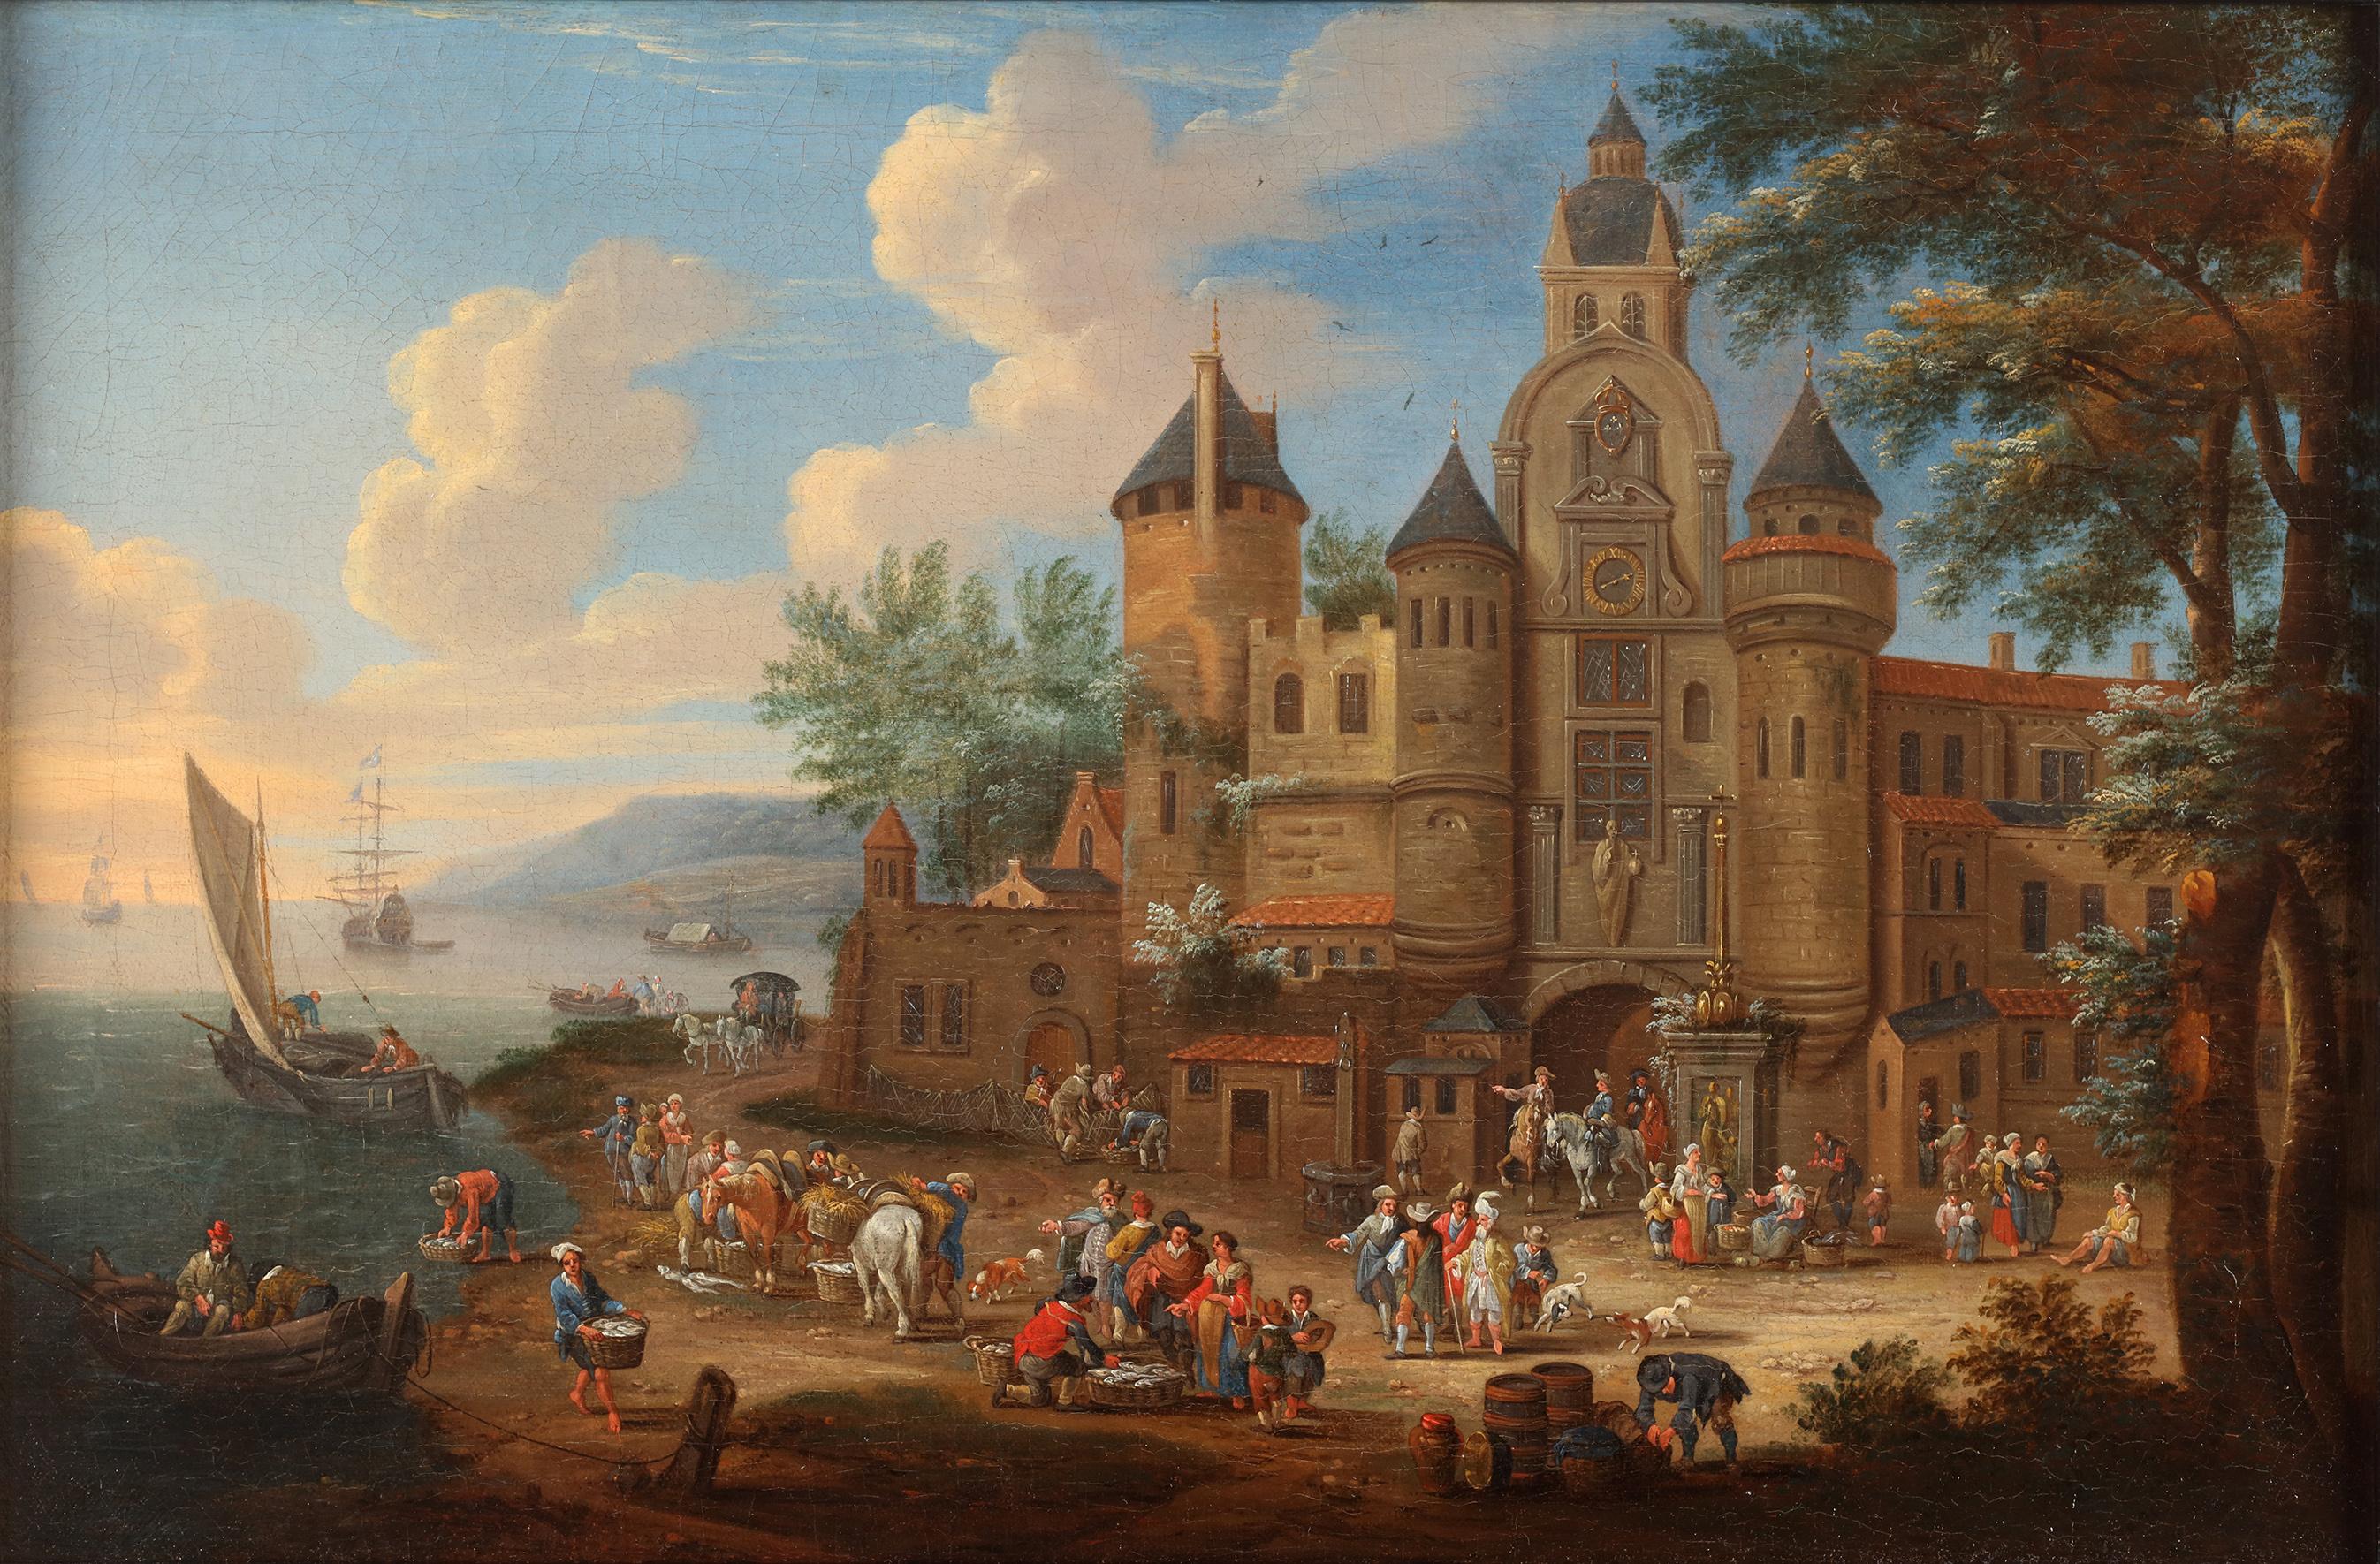 Oil on canvas

Dimensions: 38 x 67 cm  

Schoevaerdt's specialty was combination landscapes, in which airy landscapes are often combined with a body of water and imaginative capriccio-like architecture, whereby the figure staffage was often provided